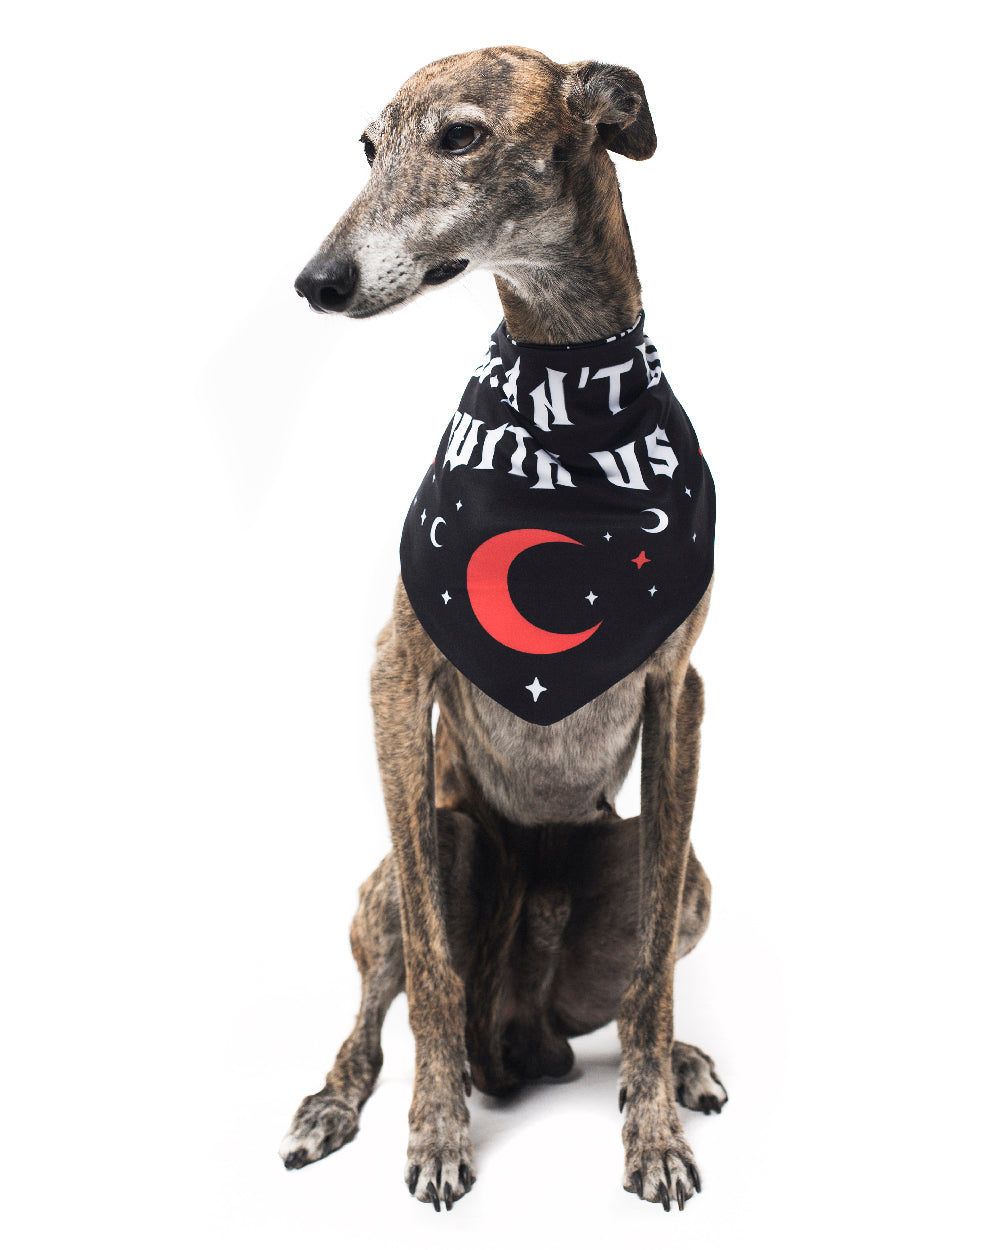 You Can't Dig With Us Pet Bandana - Dog or Cat